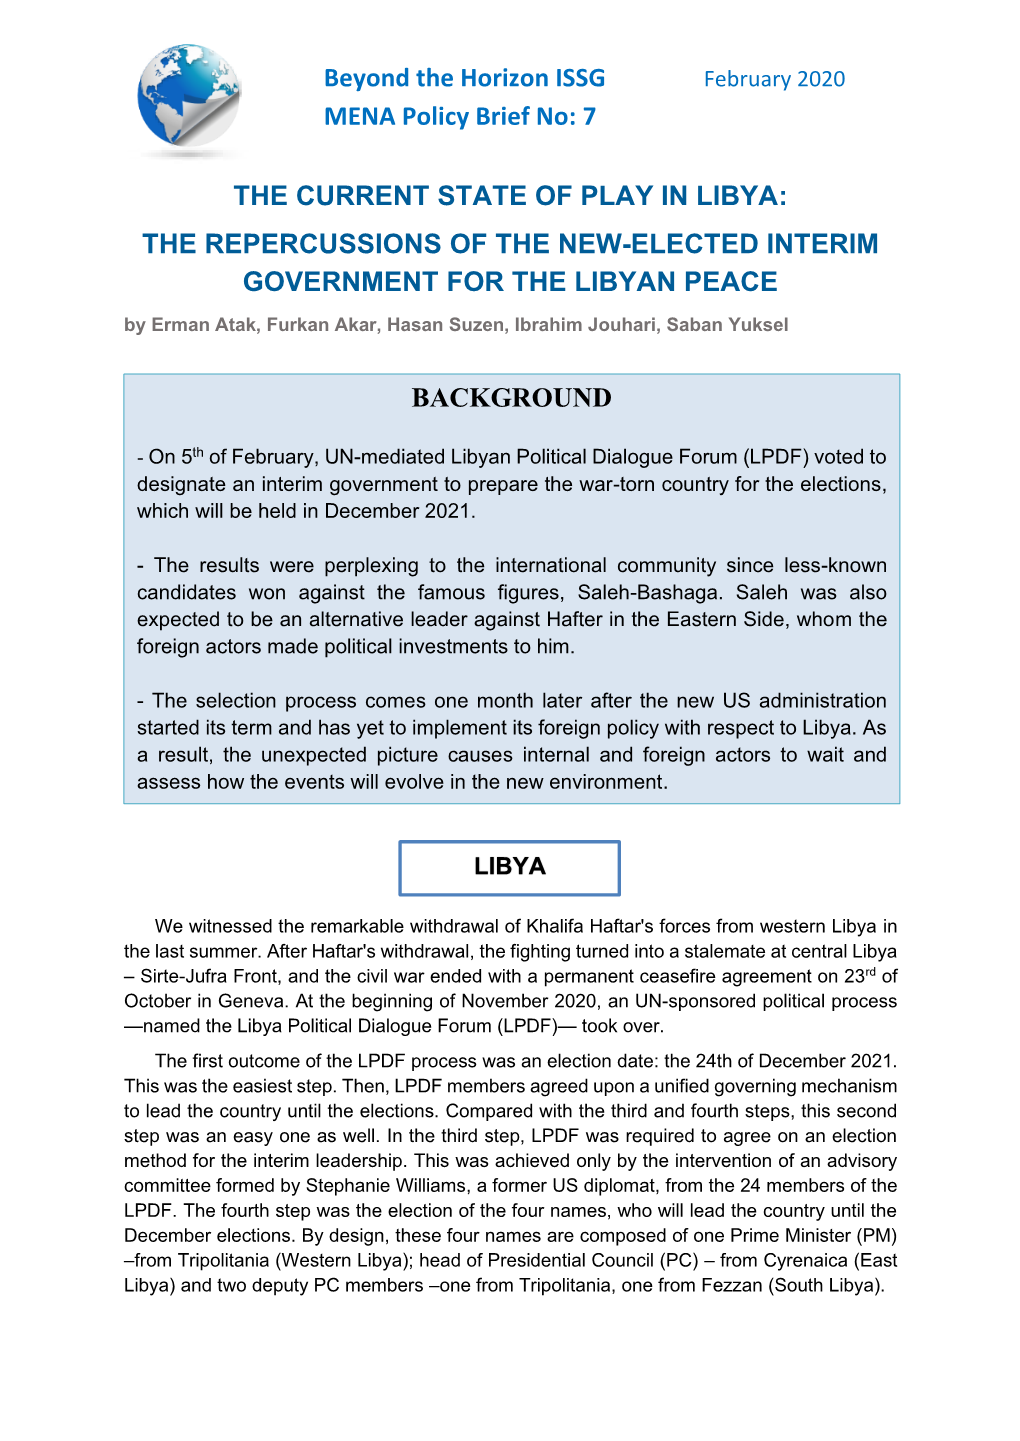 Beyond the Horizon ISSG MENA Policy Brief No: 7 the CURRENT